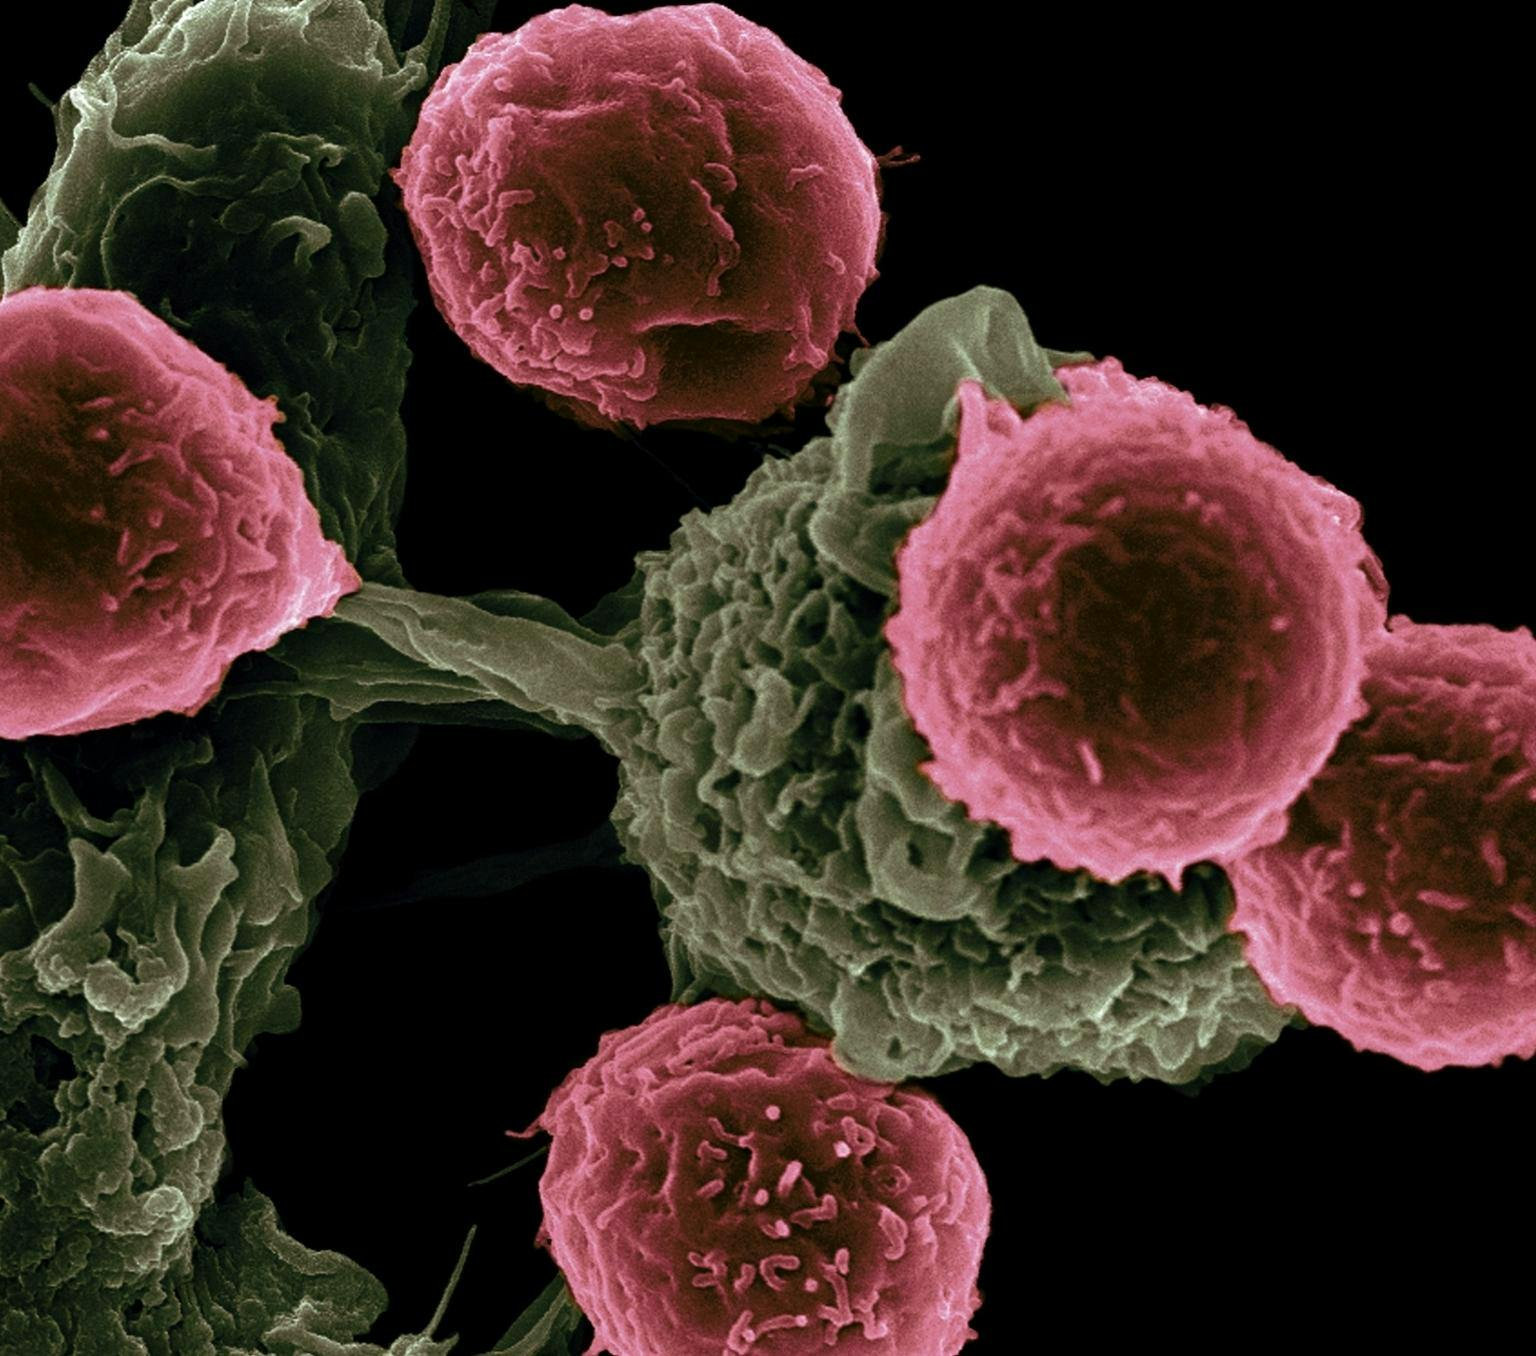 scanning electron microscope image shows dendritic cells, pseudo-colored in green, interacting with T cells, pseudo-colored in pink.